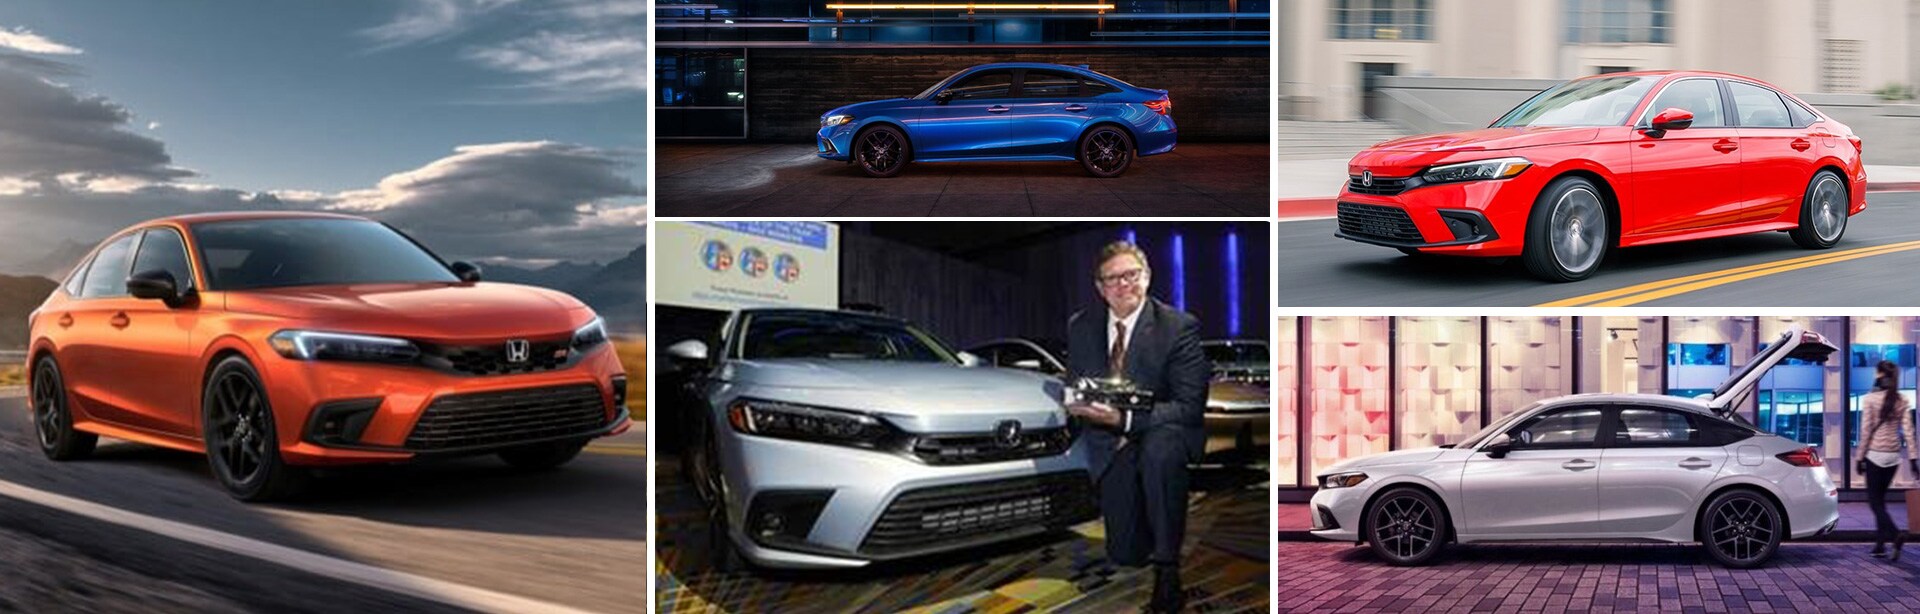 Learn More About the Award-Winning 2022 Honda Civic Today